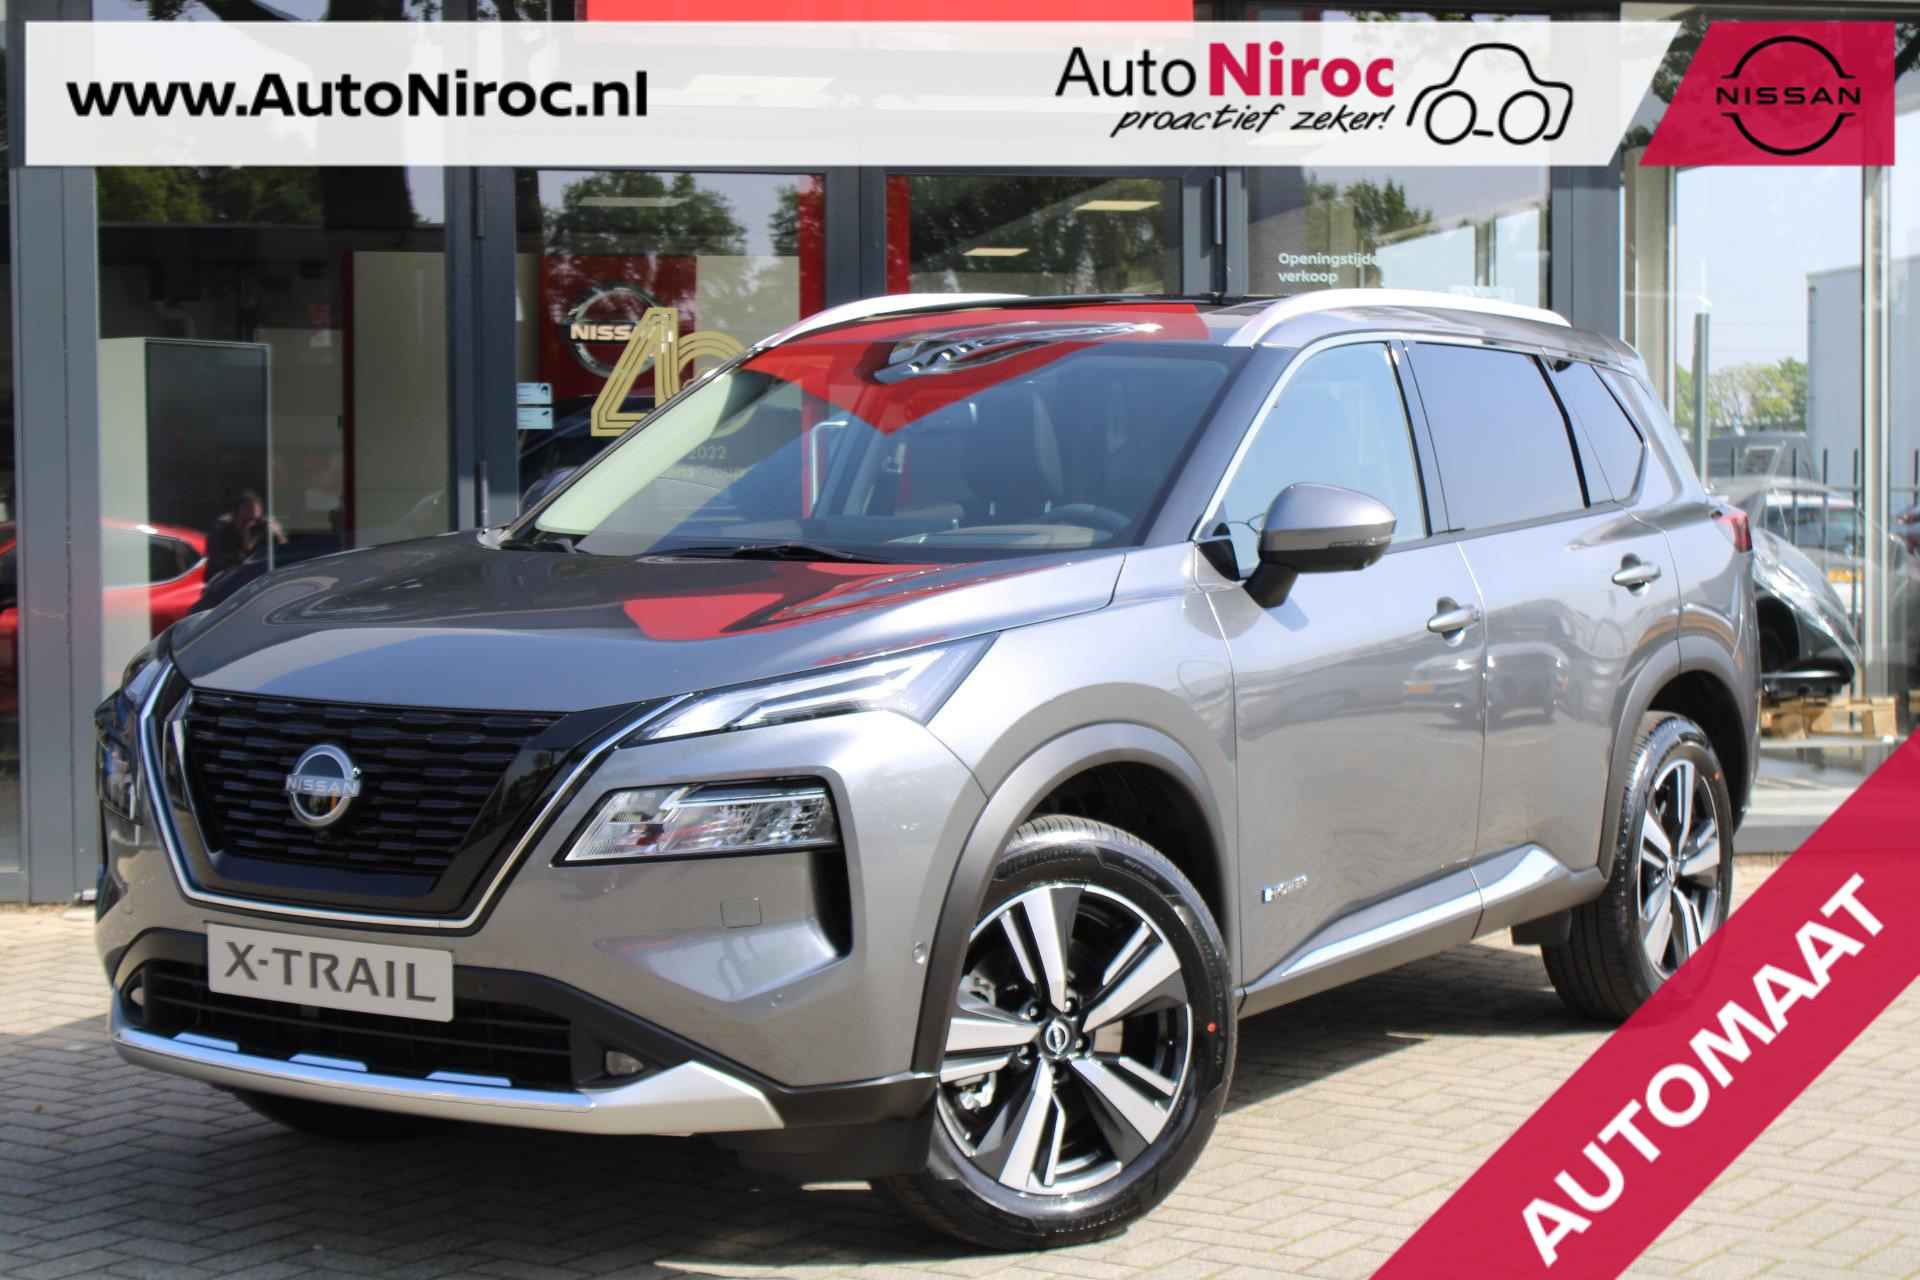 Nissan X-Trail e-4ORCE 4WD Tekna | SUN PACK | 7 PERSOONS | € 4.000,- VOORRAADKORTING | - 1/62